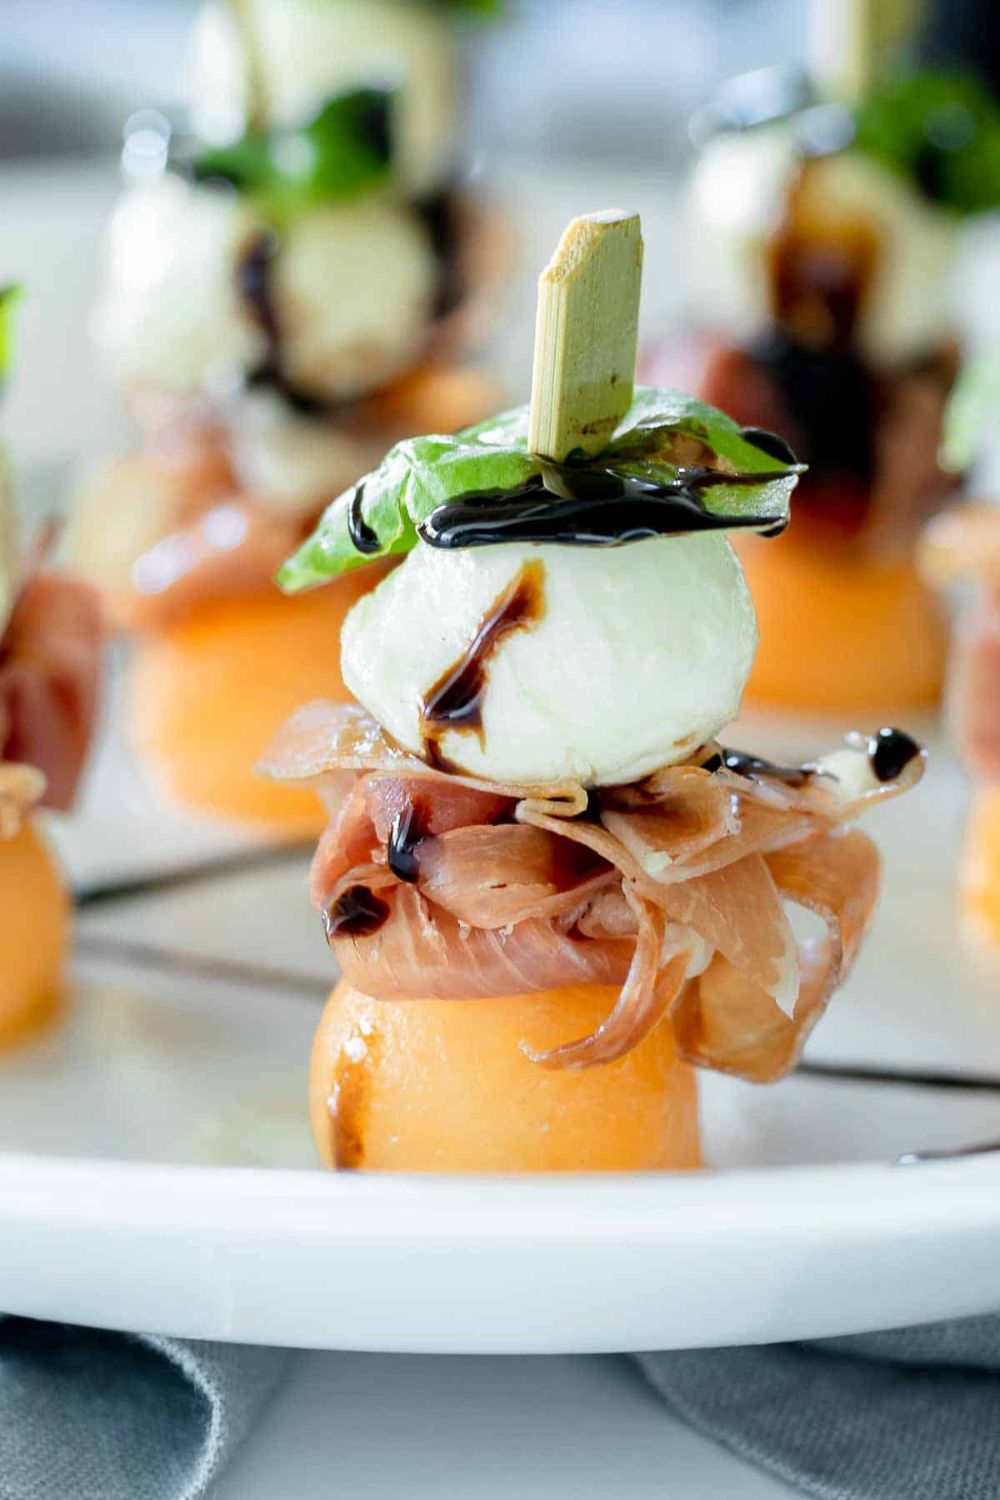 Prosciutto Melon Skewers And Mozzarella Skewers With Balsamic Glaze